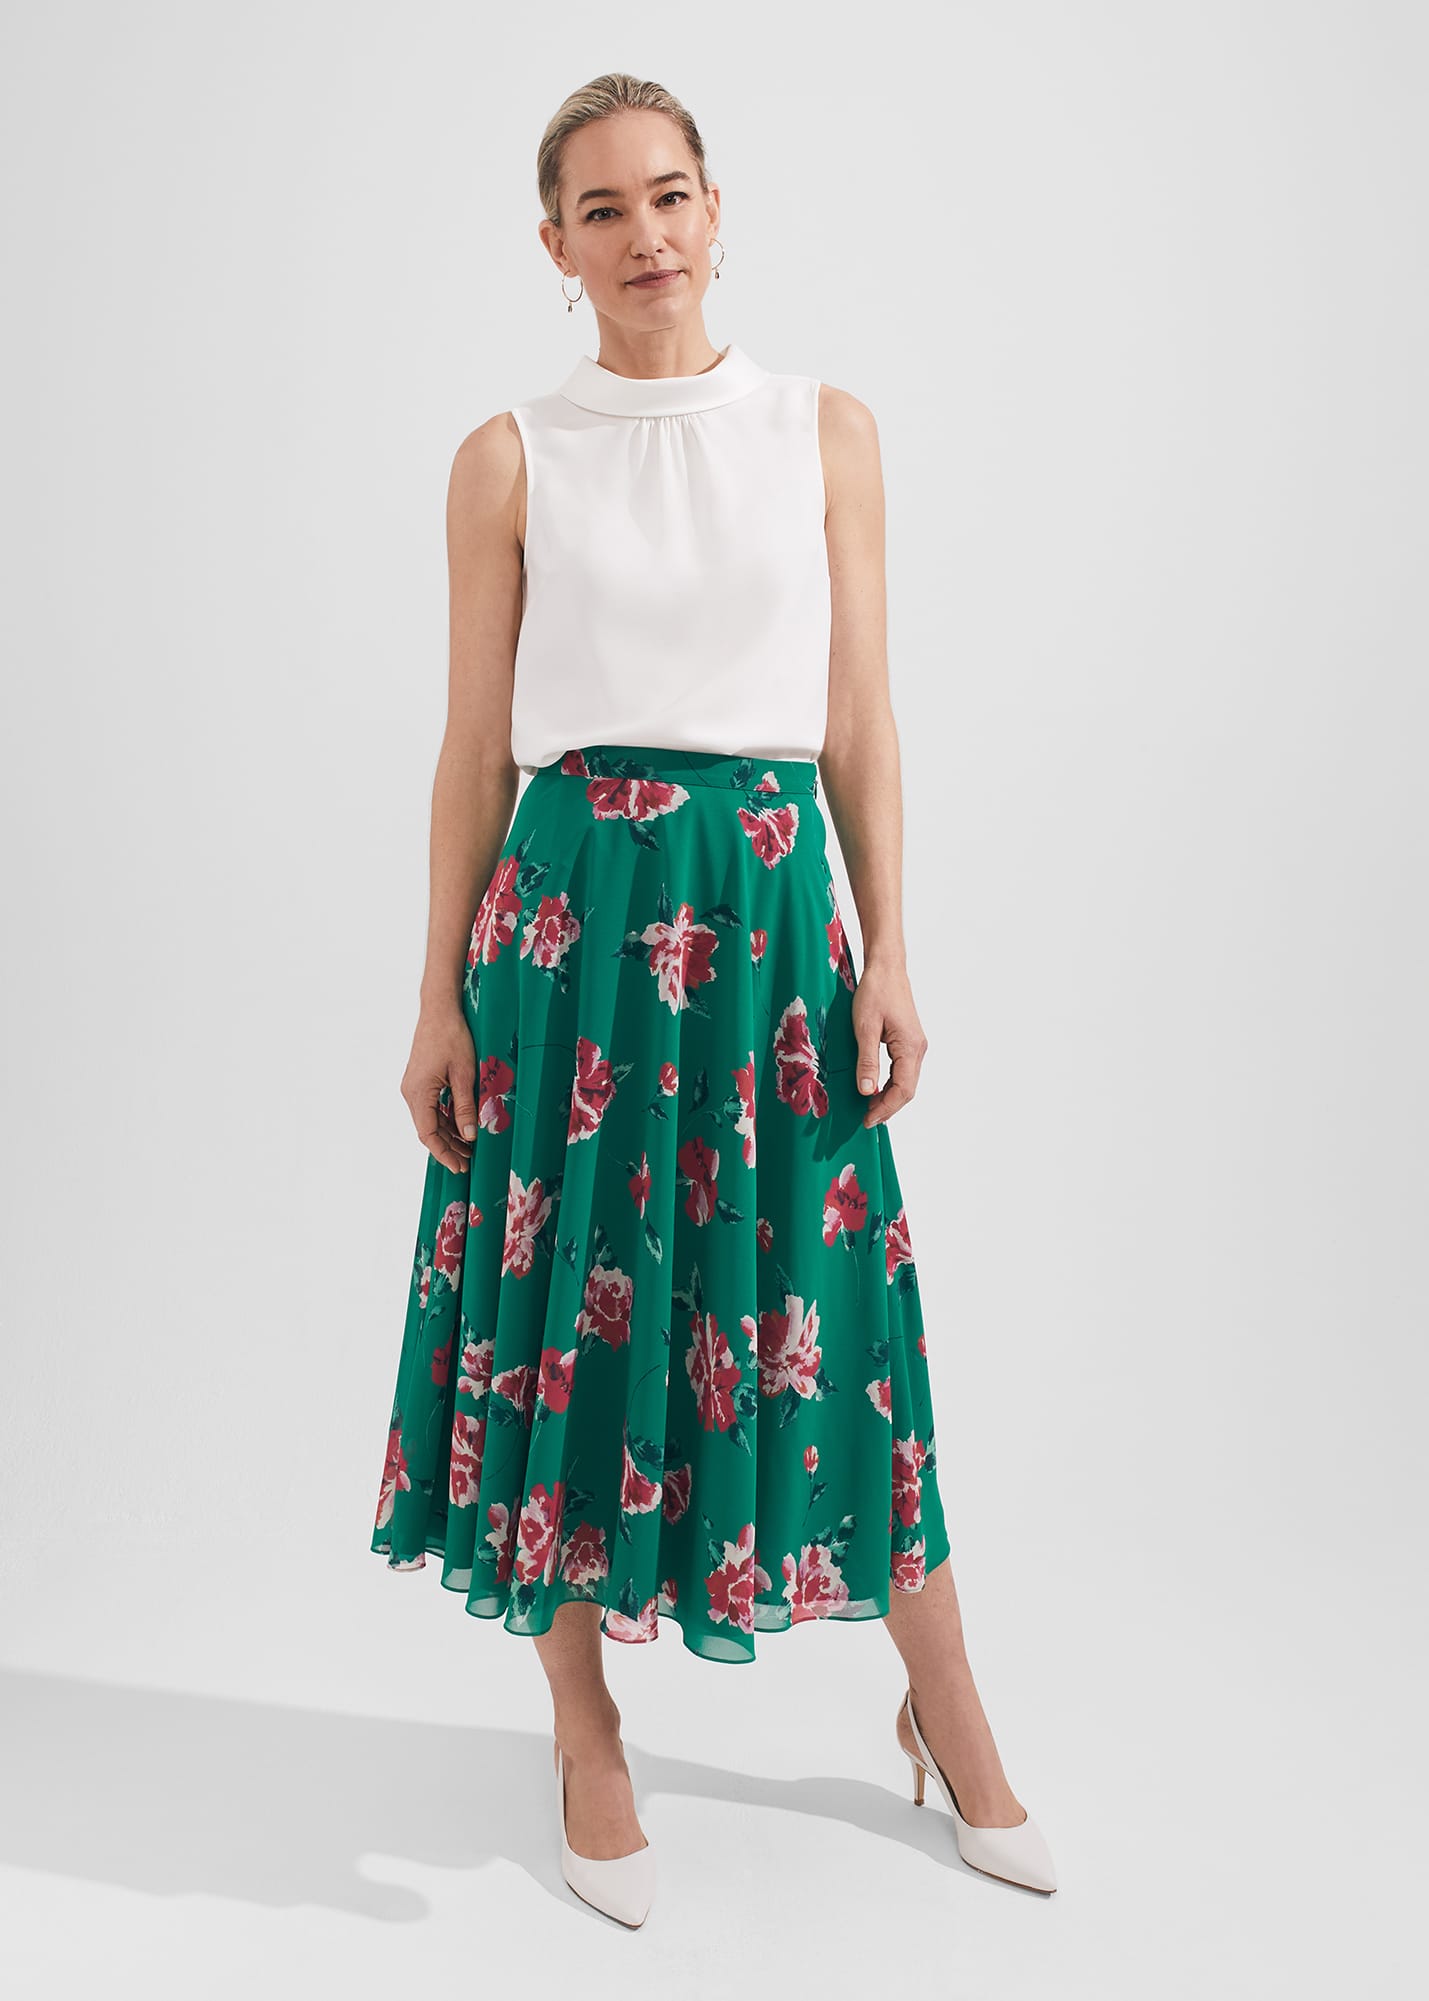 Hobbs Women's Carly Floral A Line Skirt - Green Multi